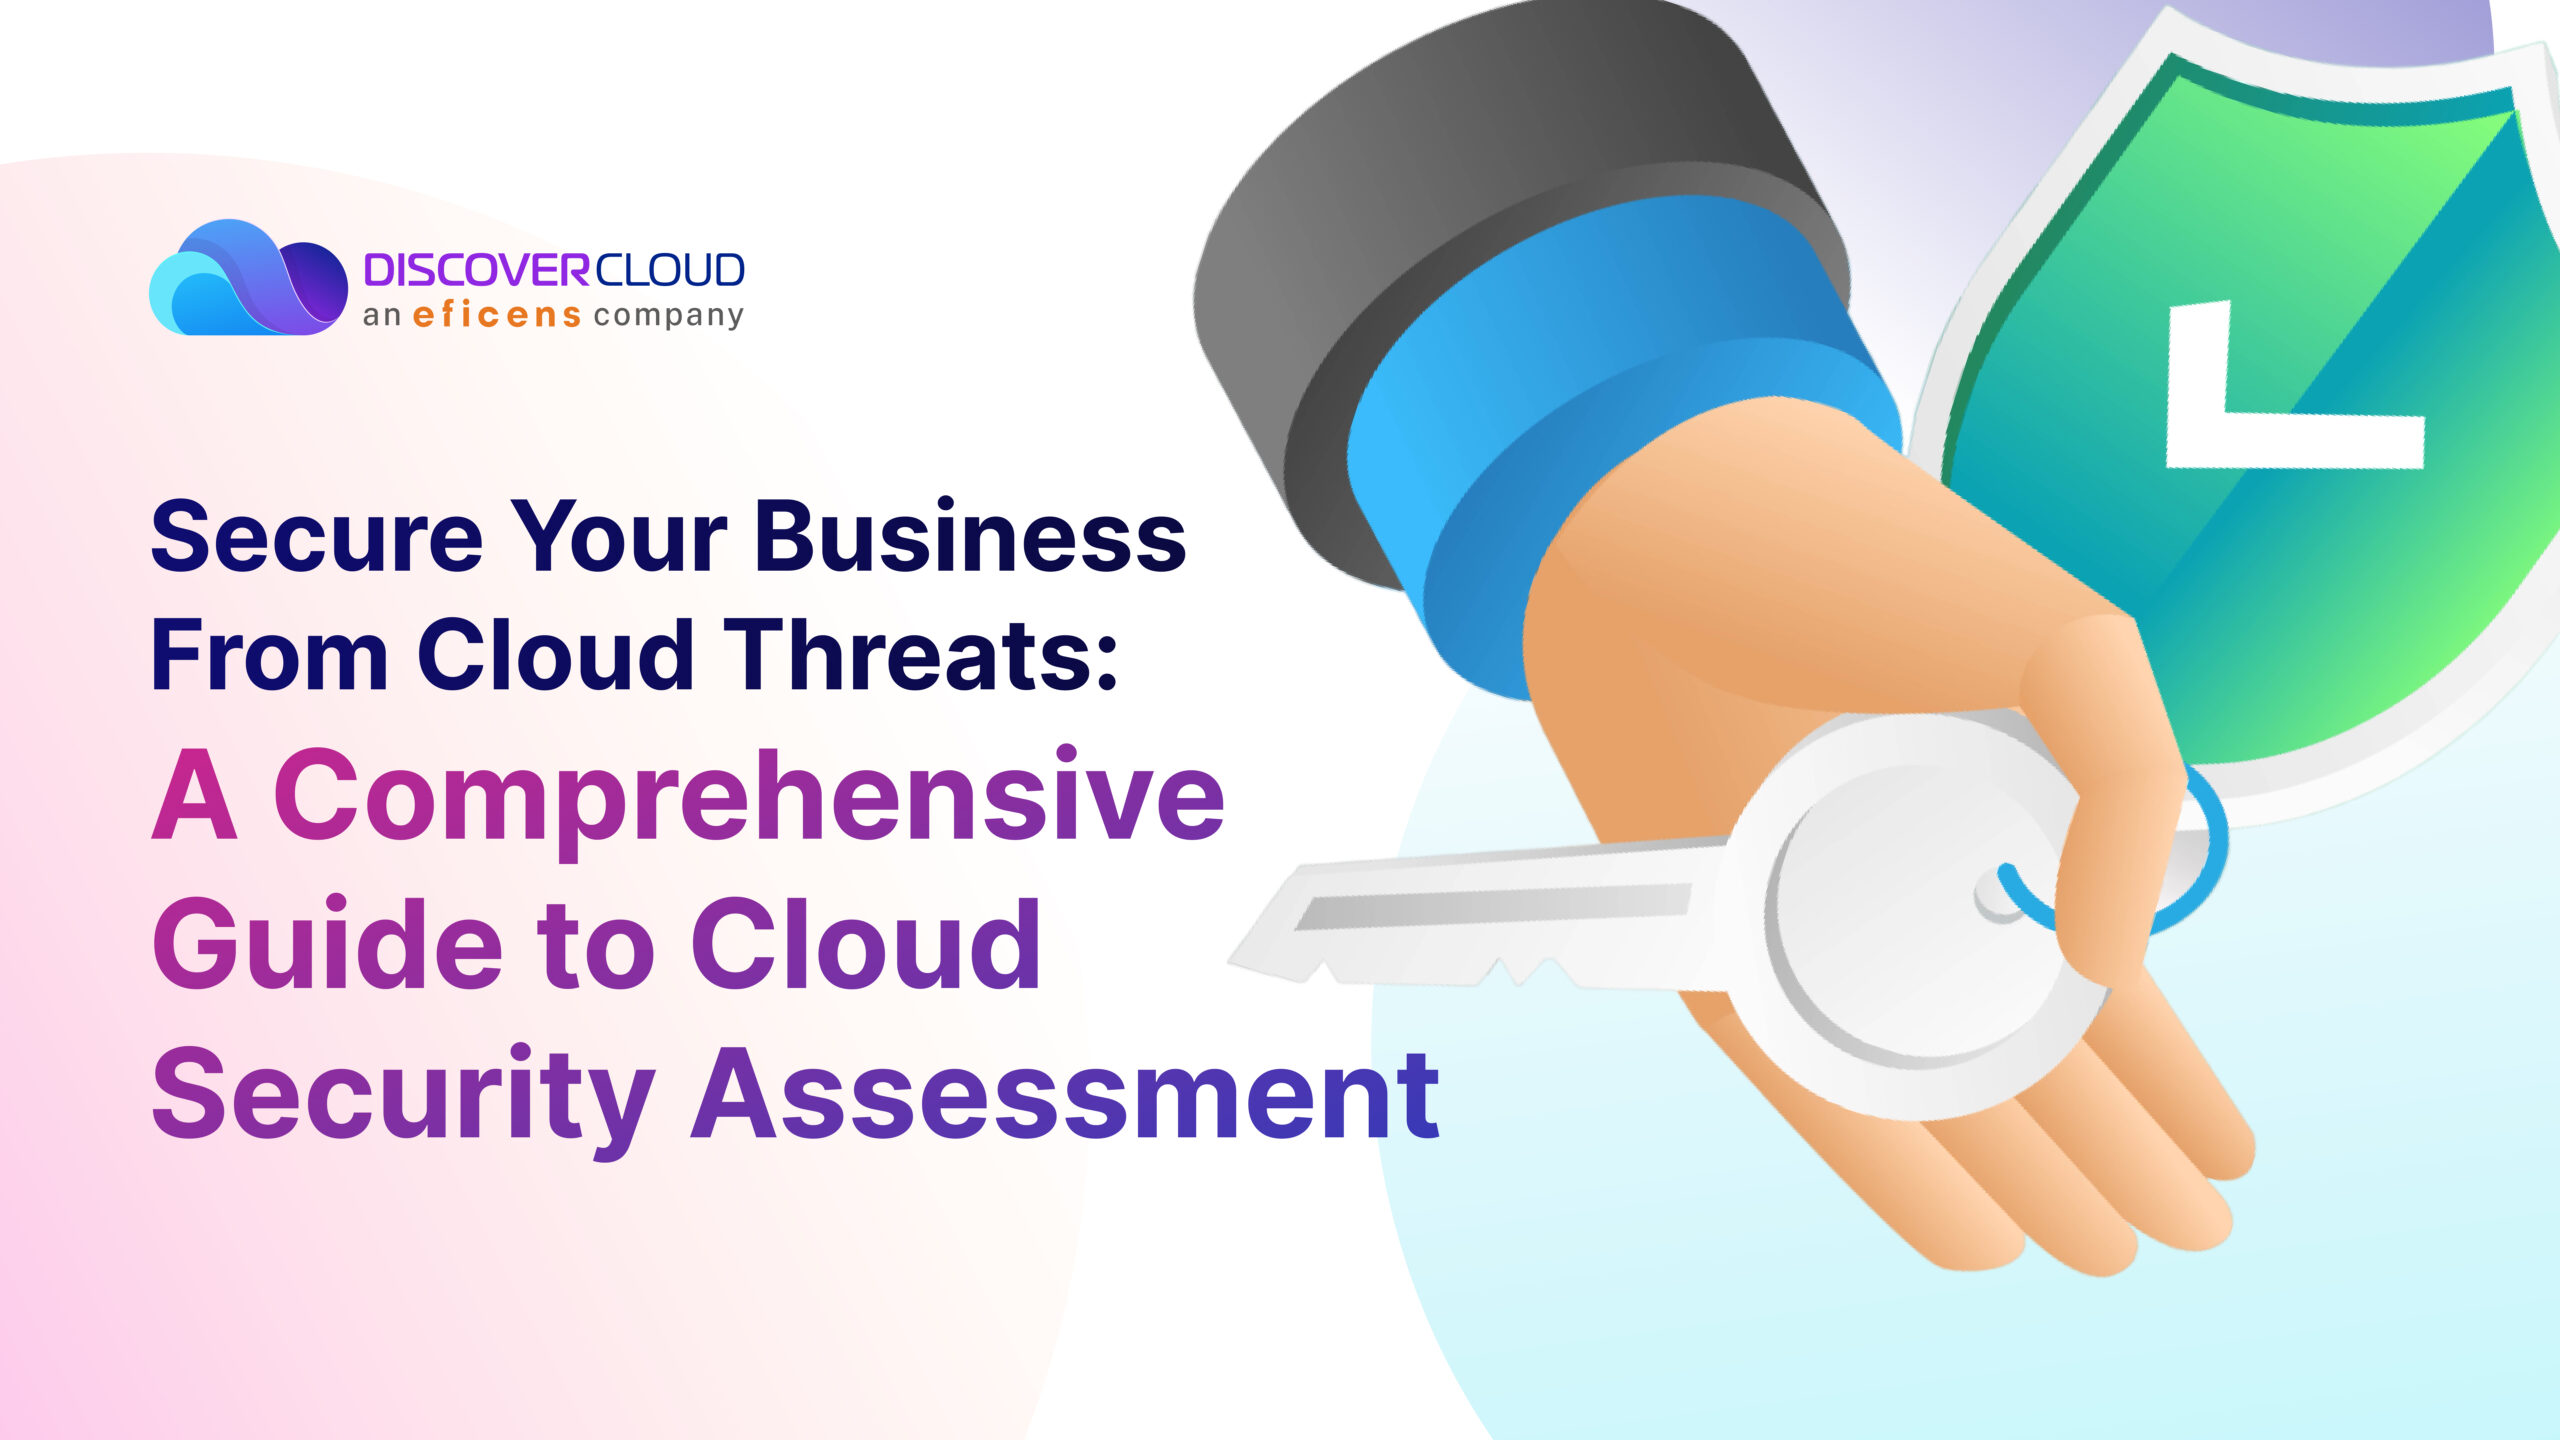 Secure Your Business From Cloud Threats: A Comprehensive Guide to Cloud Security Assessment